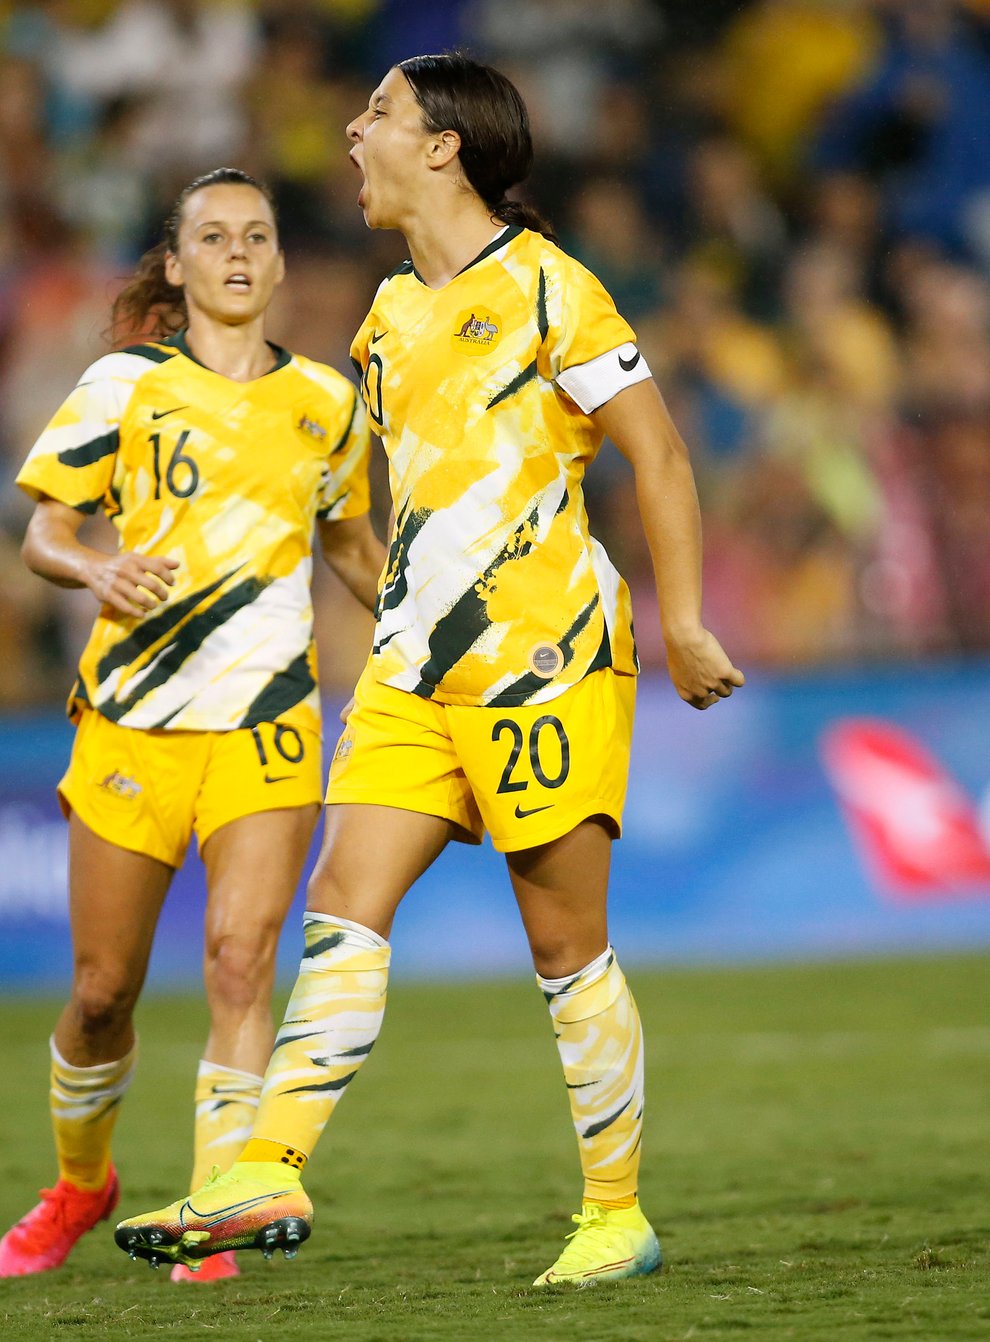 Kerr scored for the Matildas in their qualification for the Olympics (PA Images)